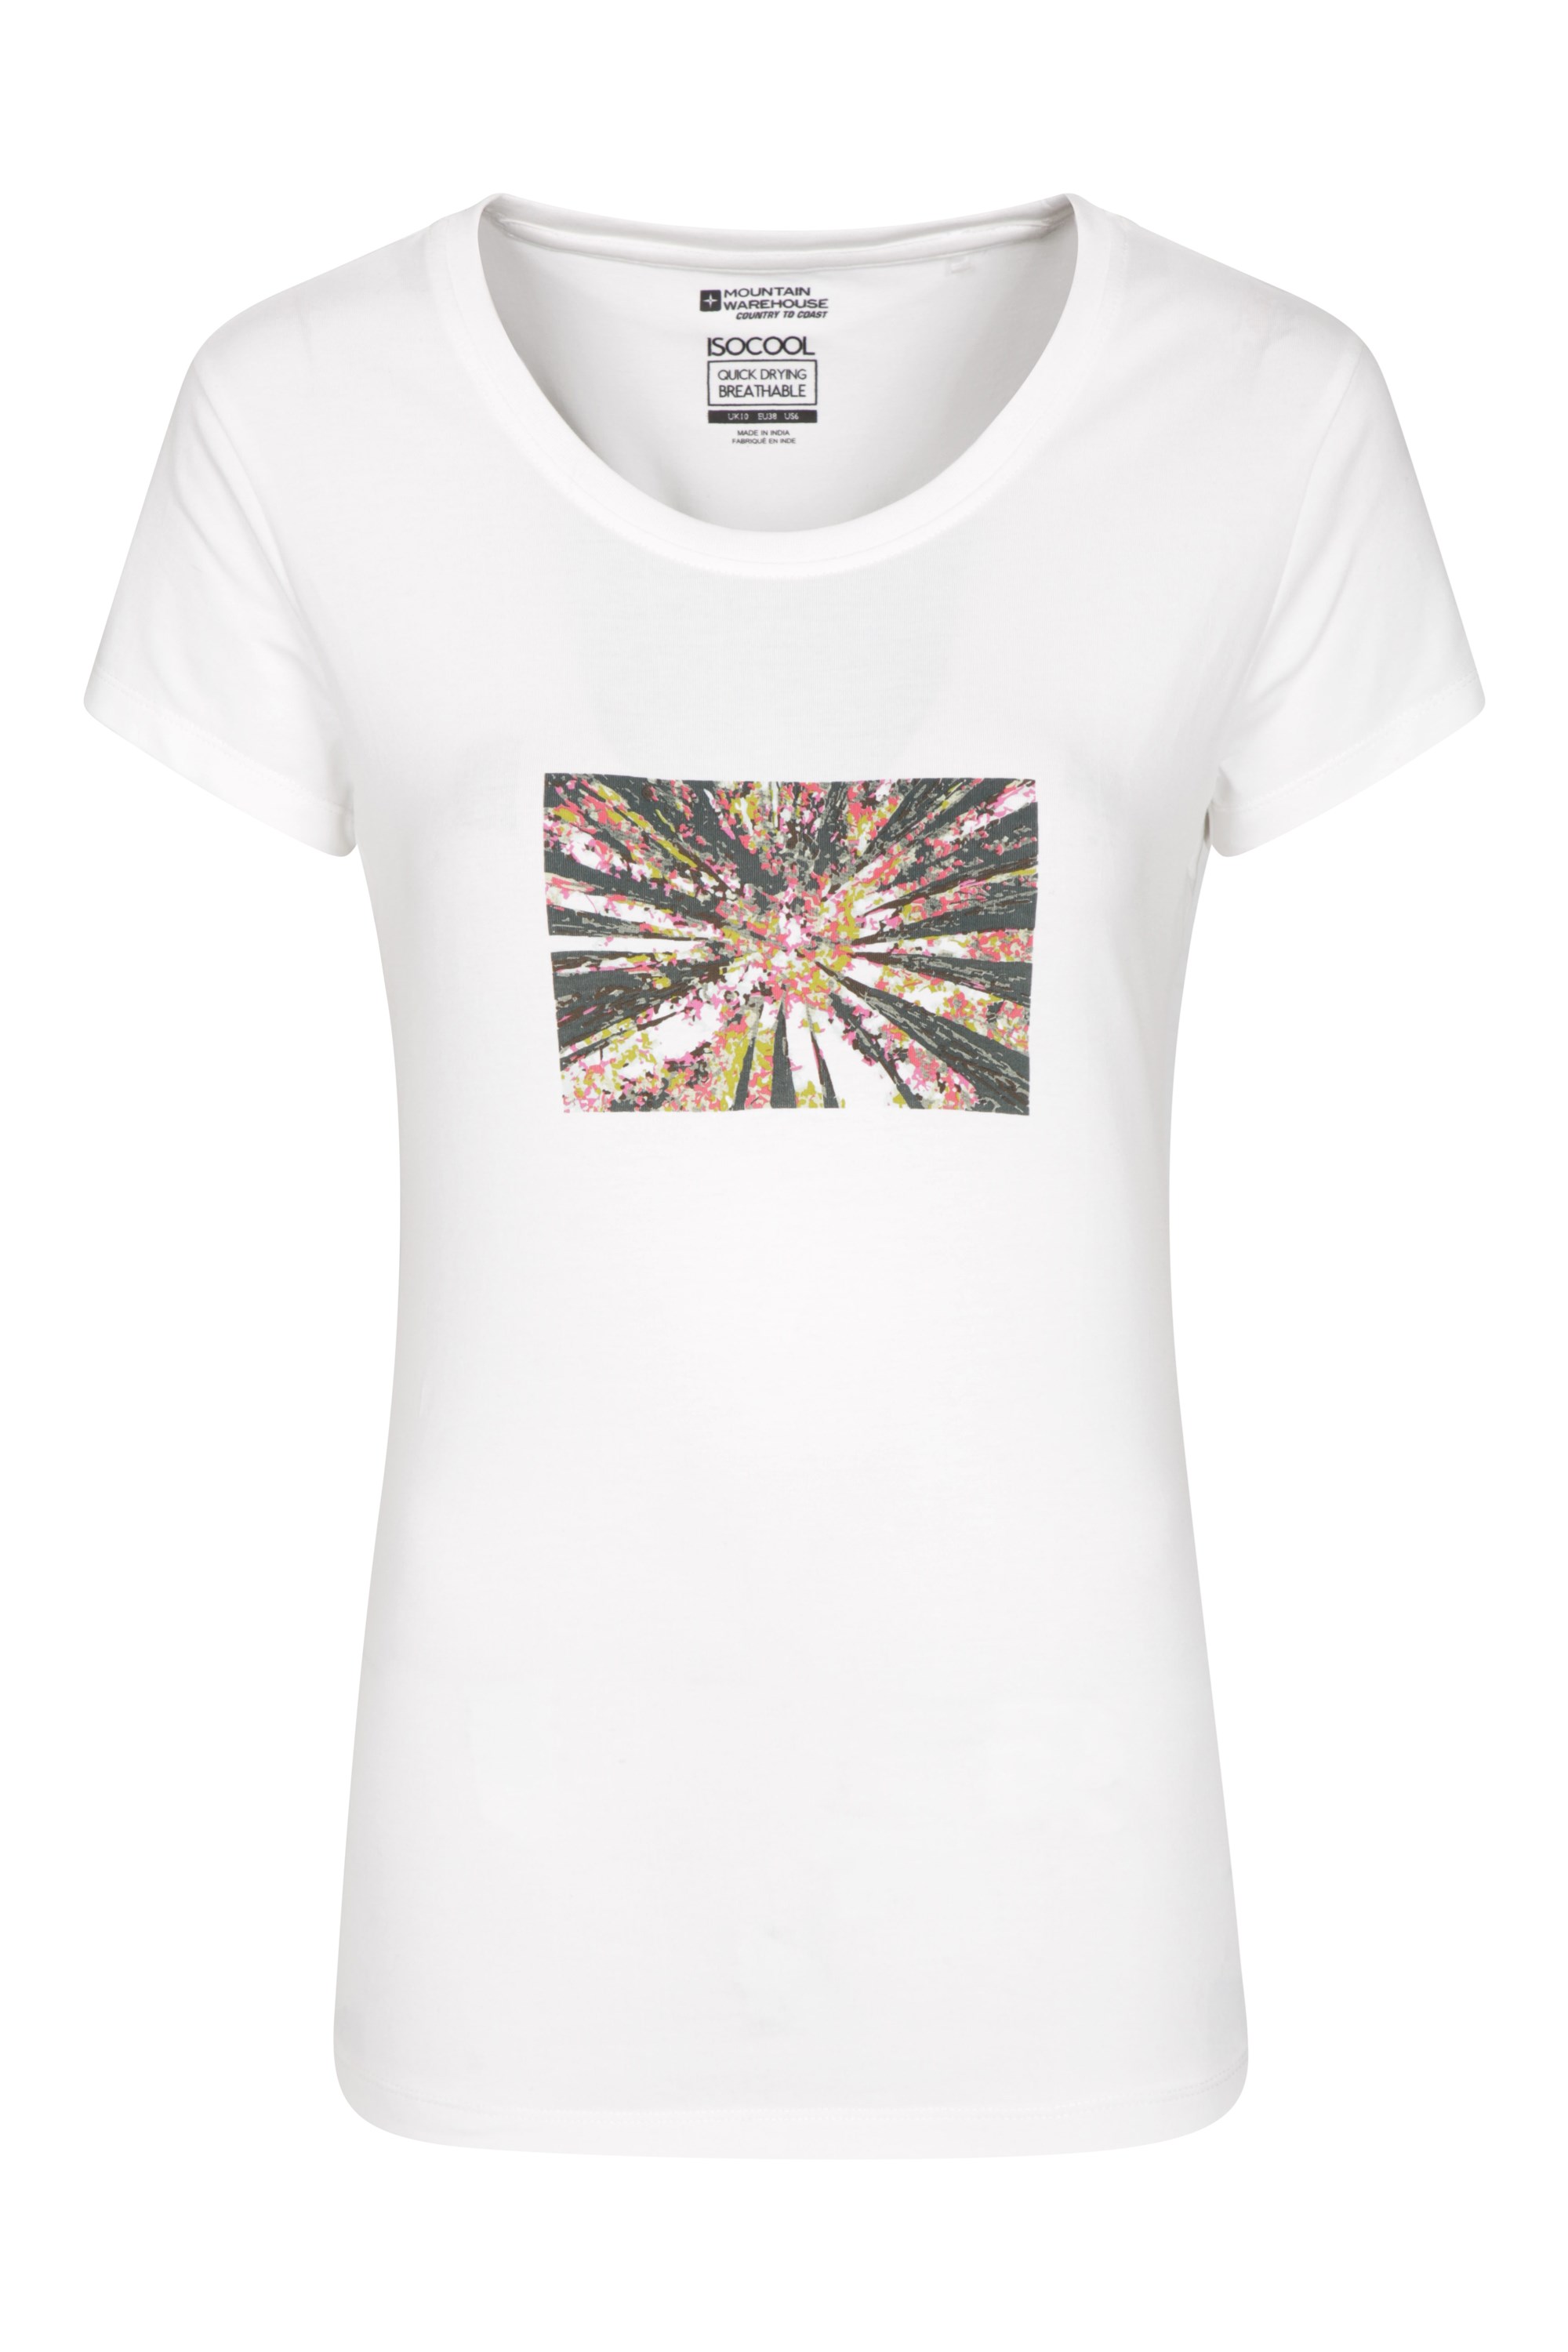 Hidden Forest Printed Womens Tee - White